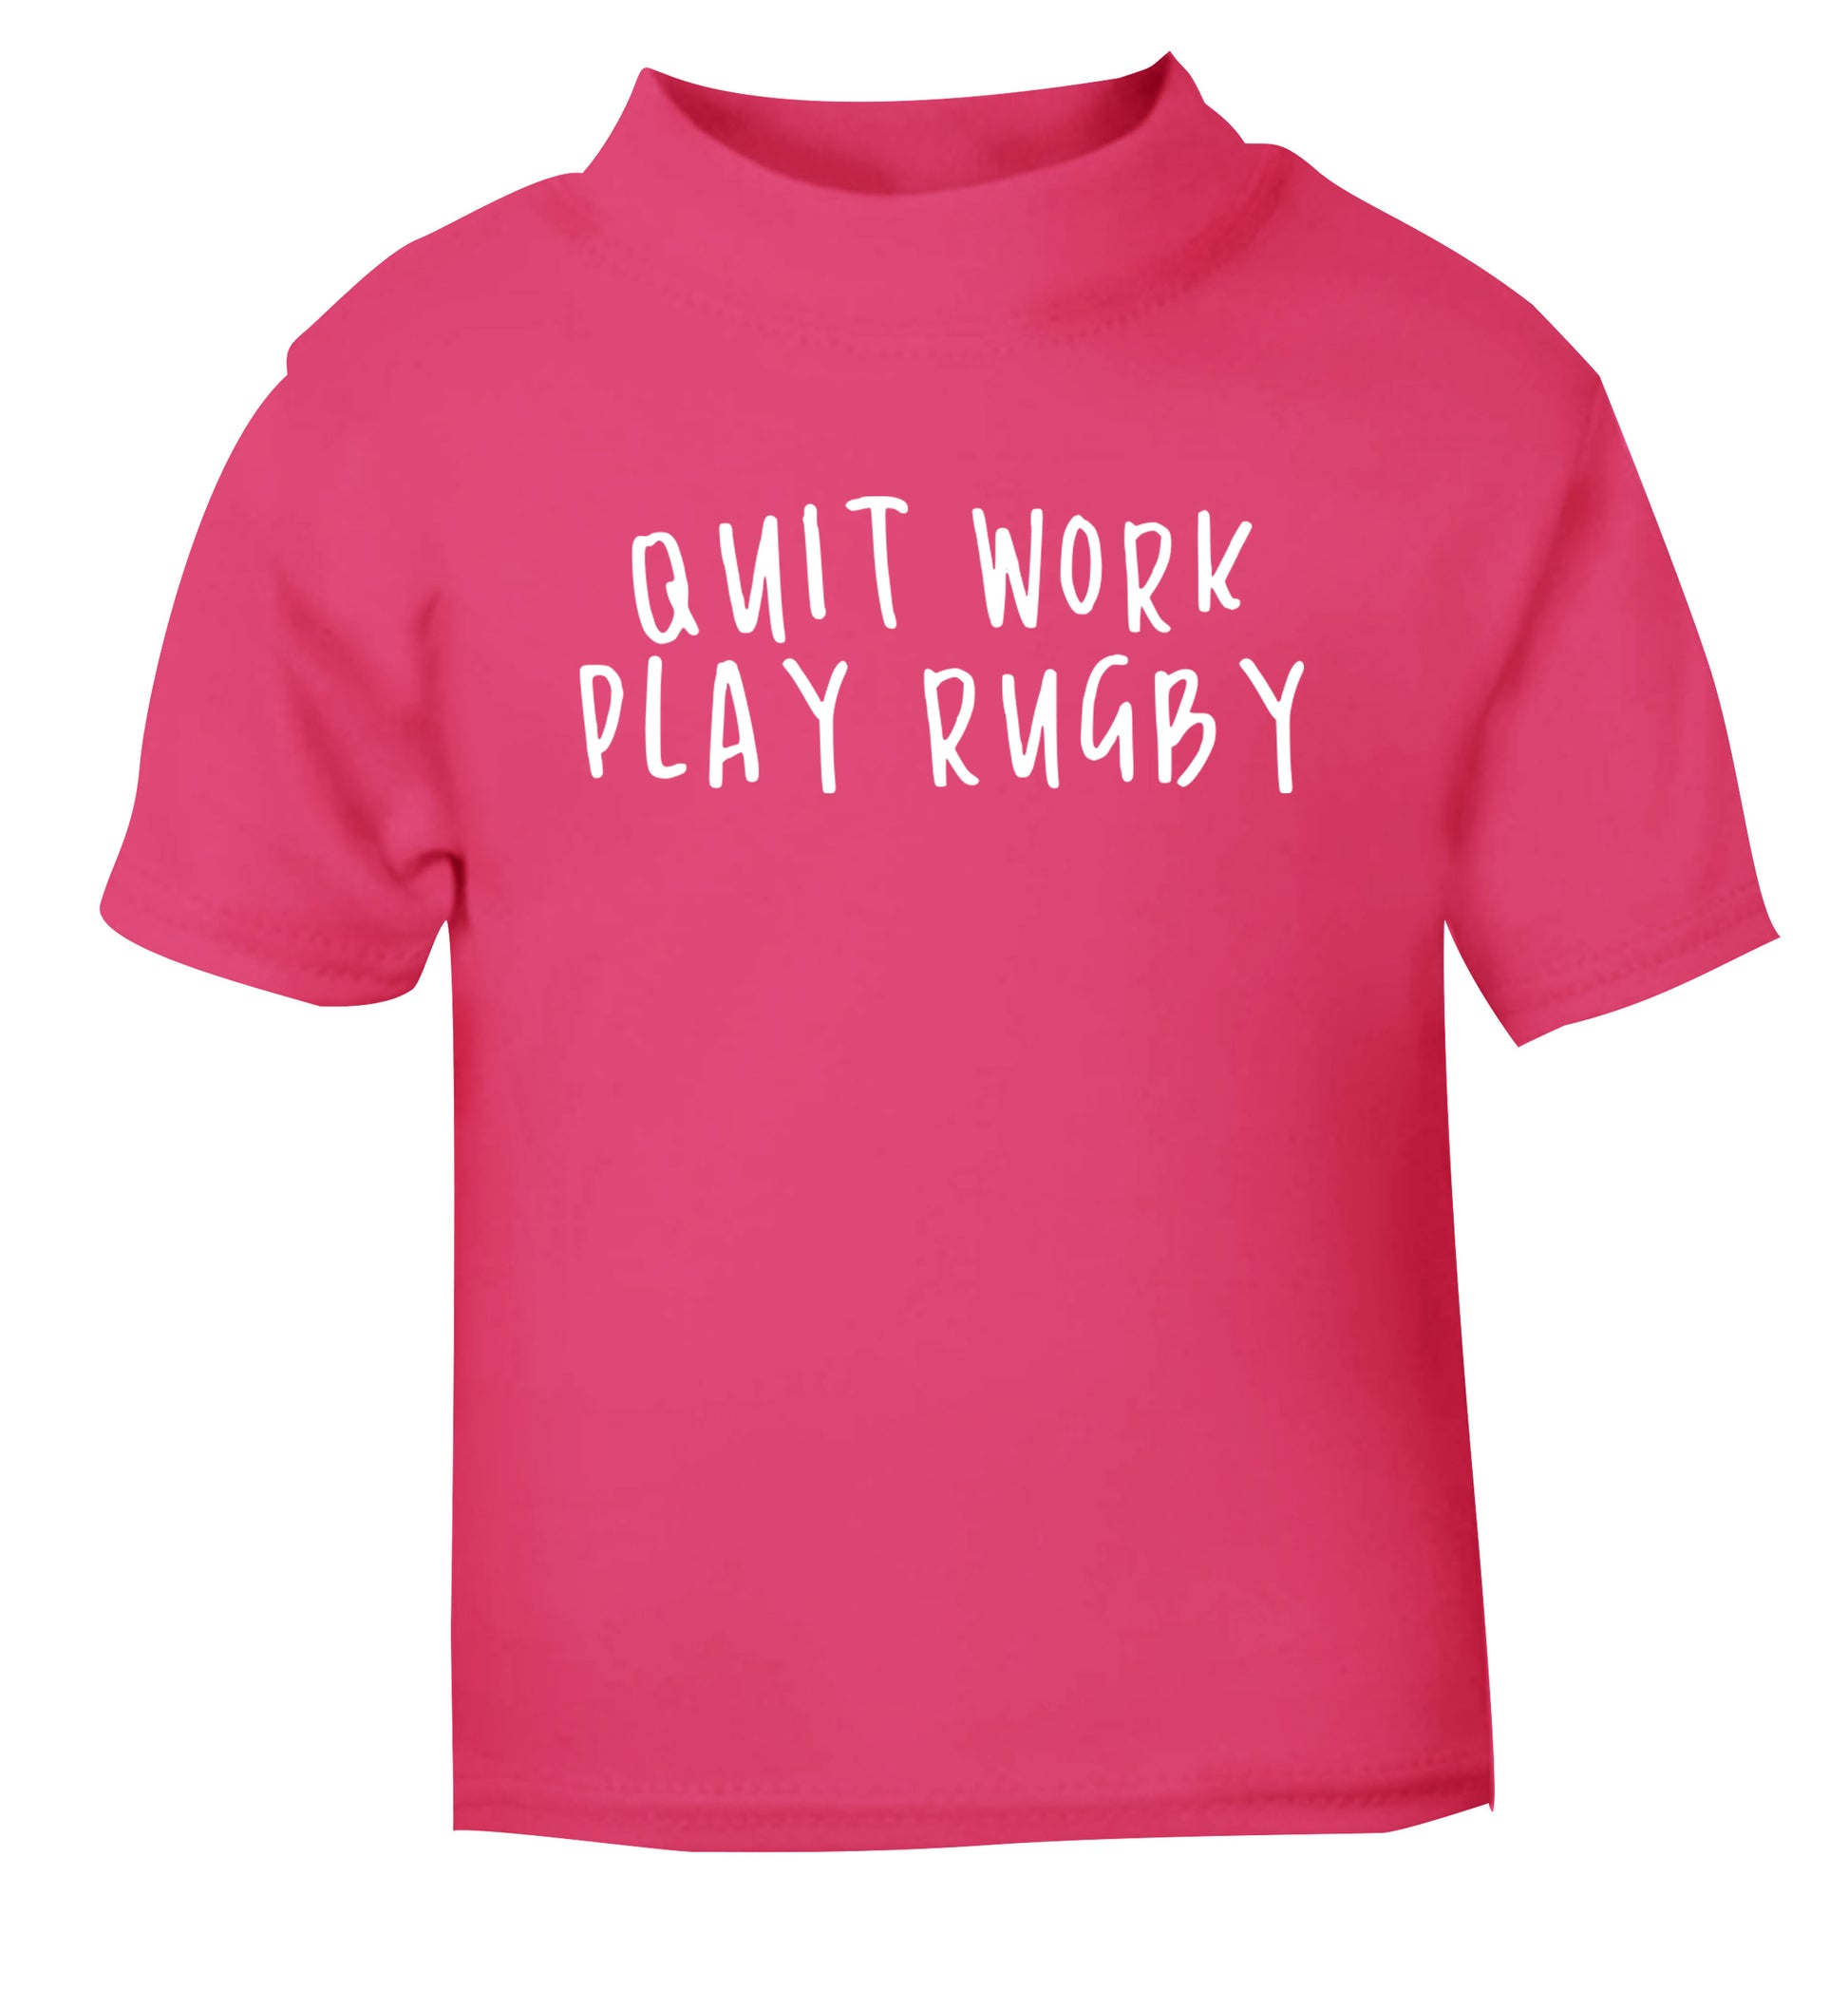 Quit work play rugby pink Baby Toddler Tshirt 2 Years